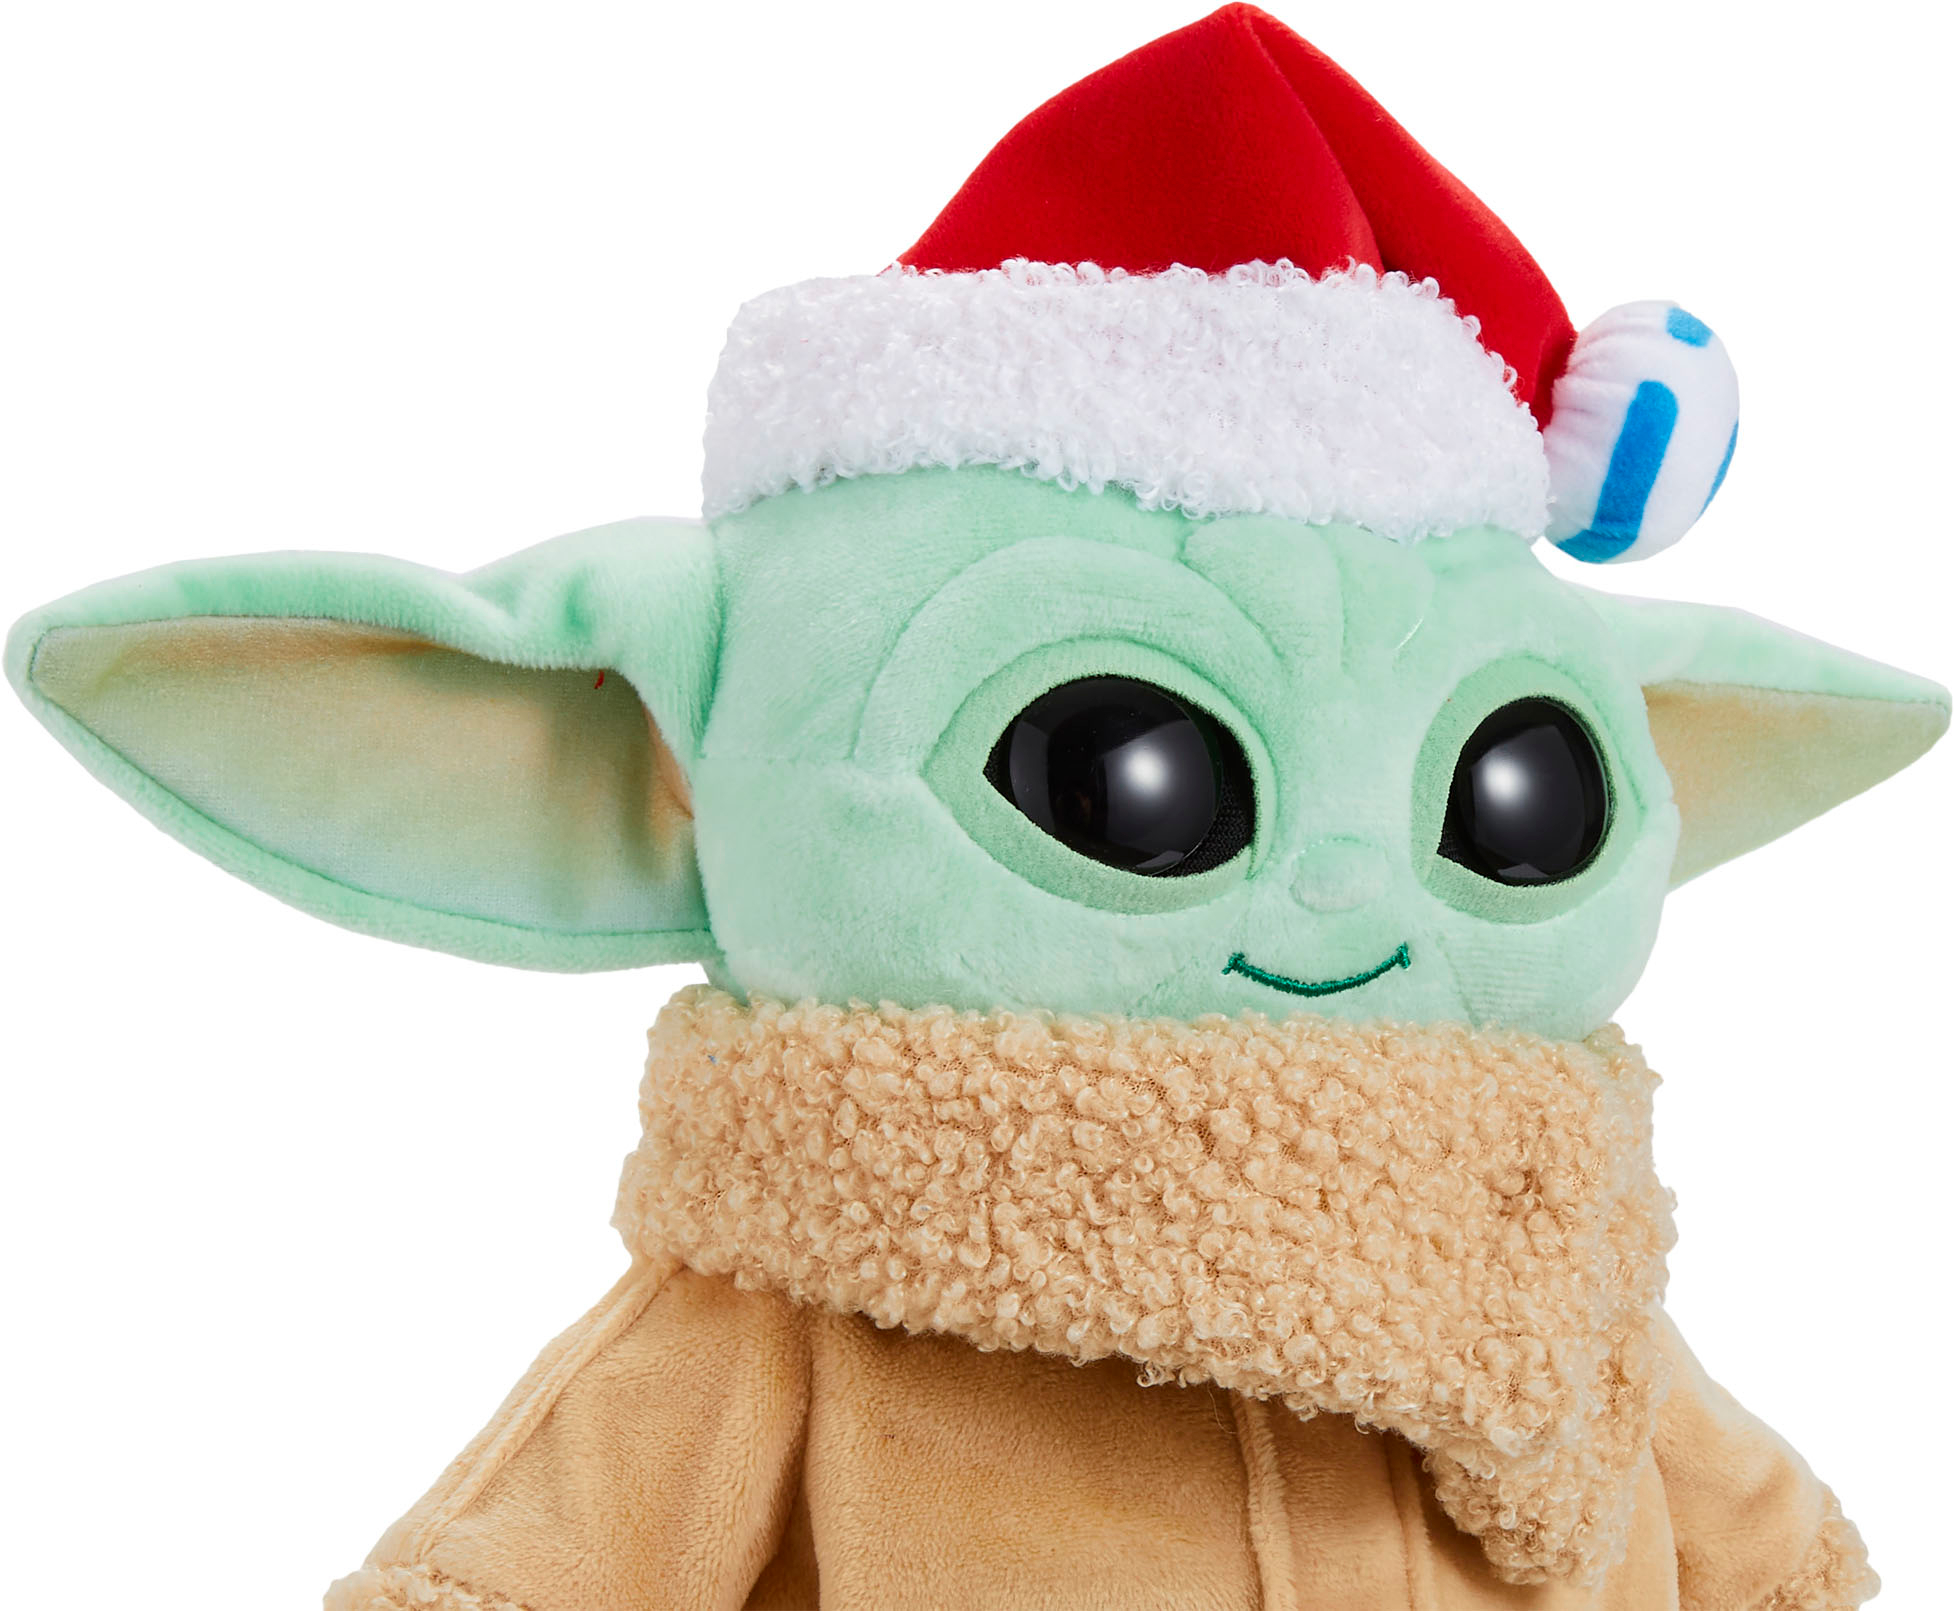 Star Wars Grogu Baby Yoda Plush Toy, 11-in The Child From The